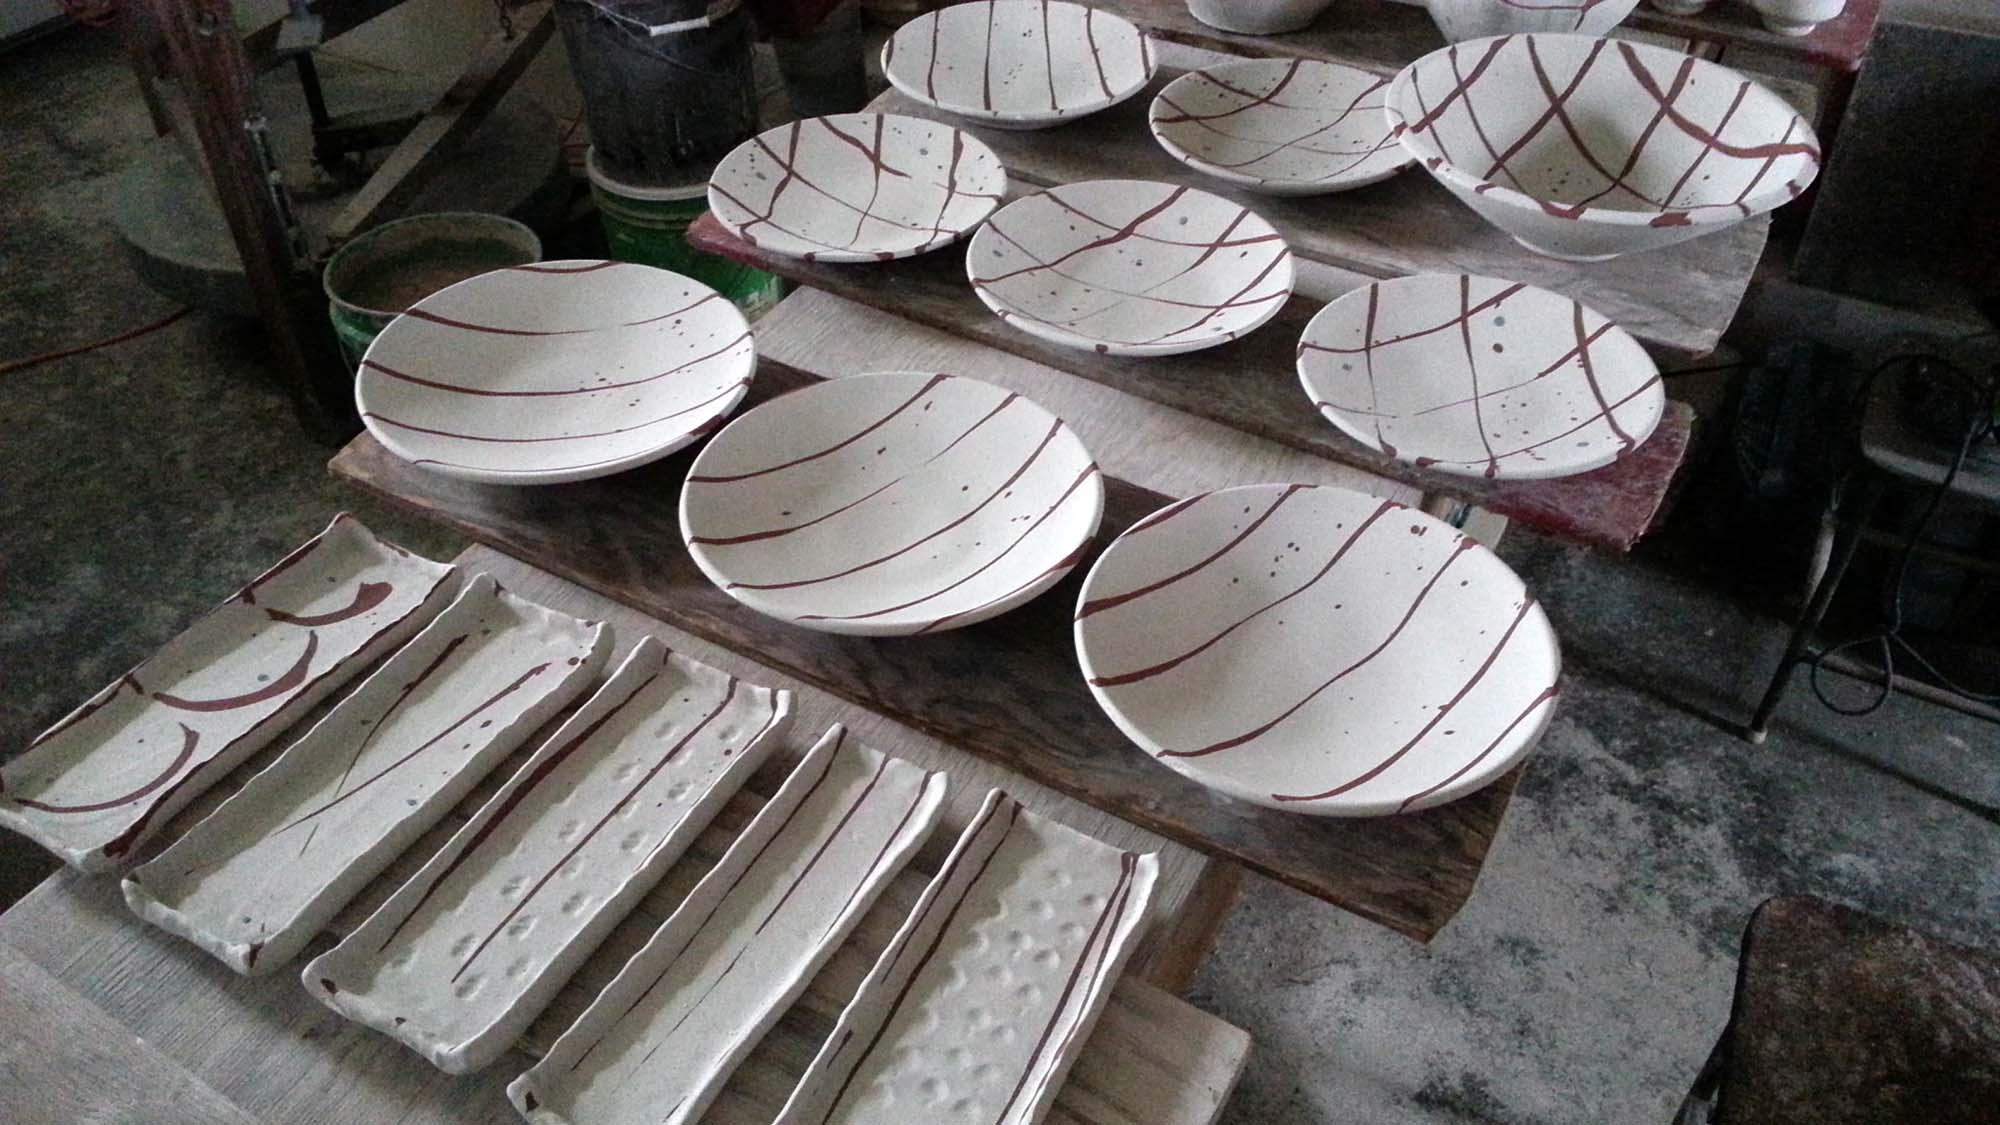  Plates and trays with raw glaze and iron oxide brush marks. Ready to be fired.&nbsp; 